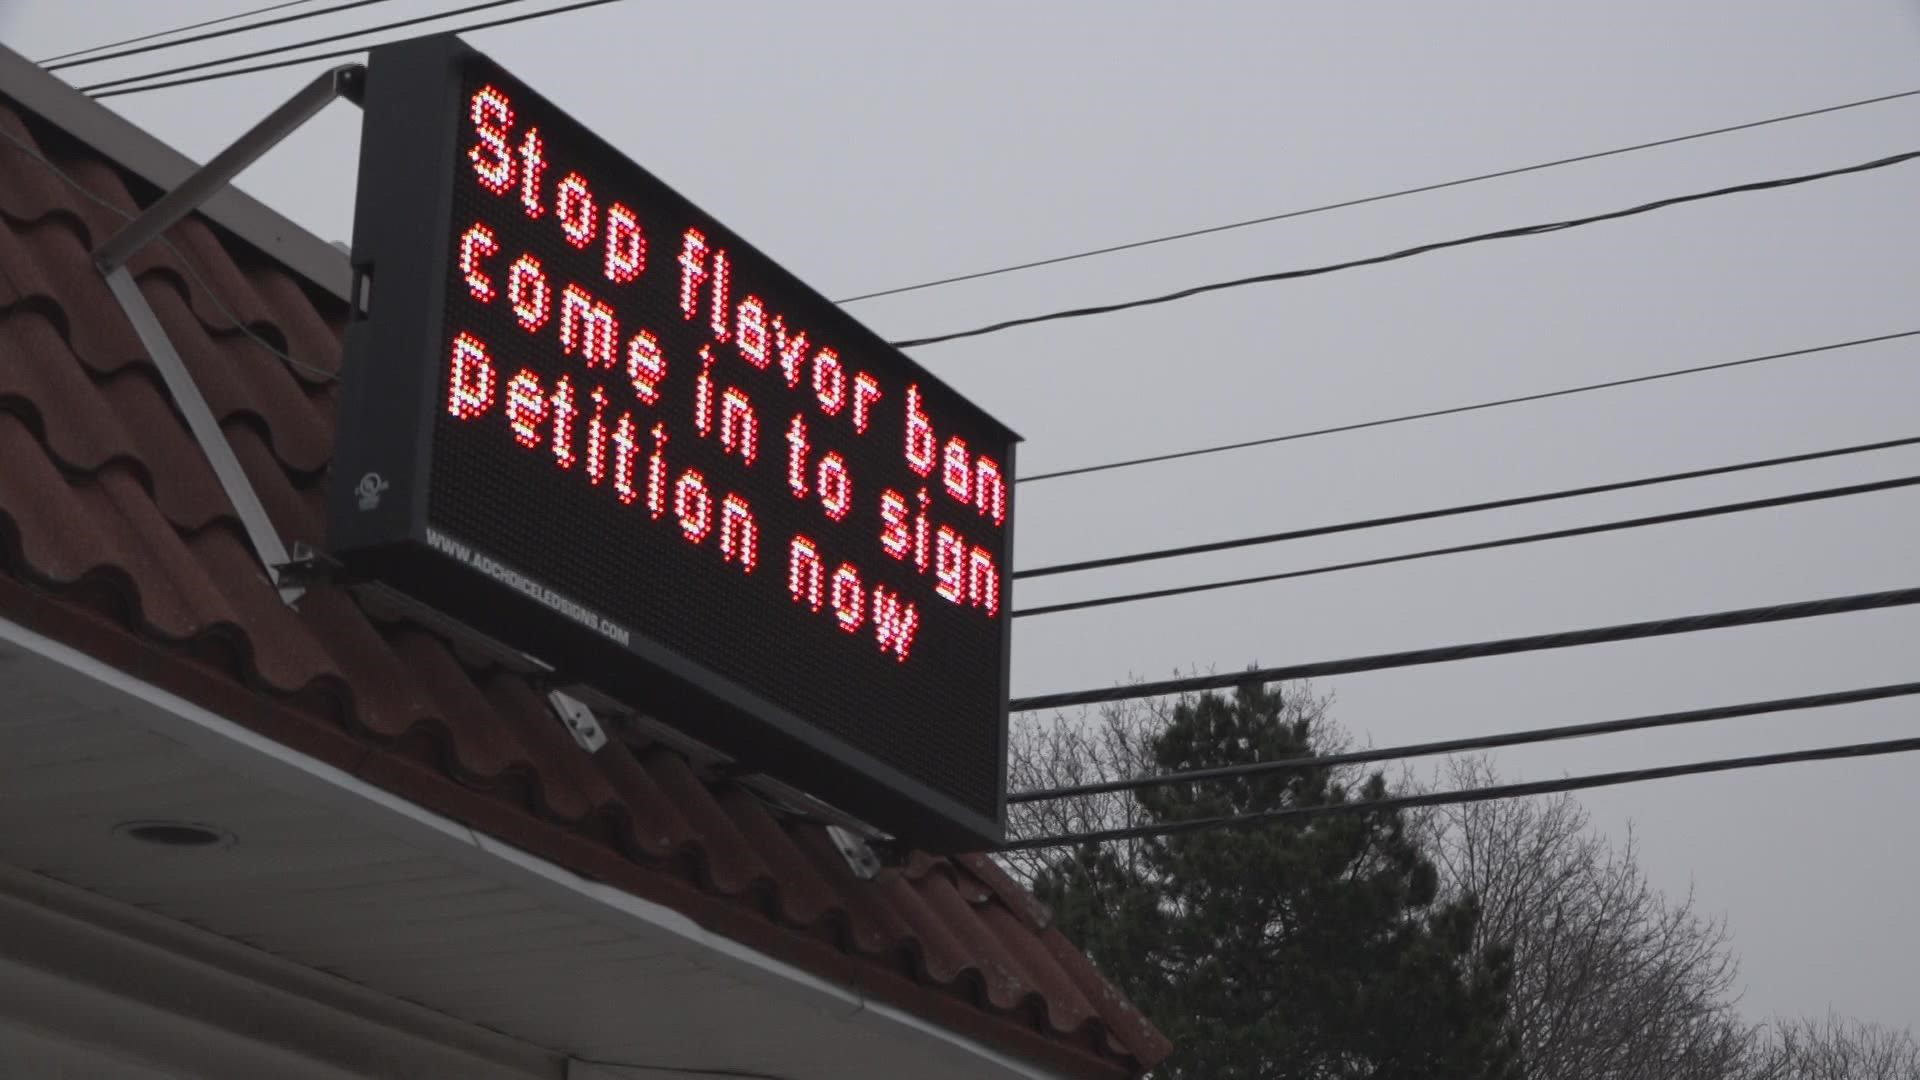 Portland Smoke and Vape is trying to fight the ban by asking South Portland residents to sign a petition.